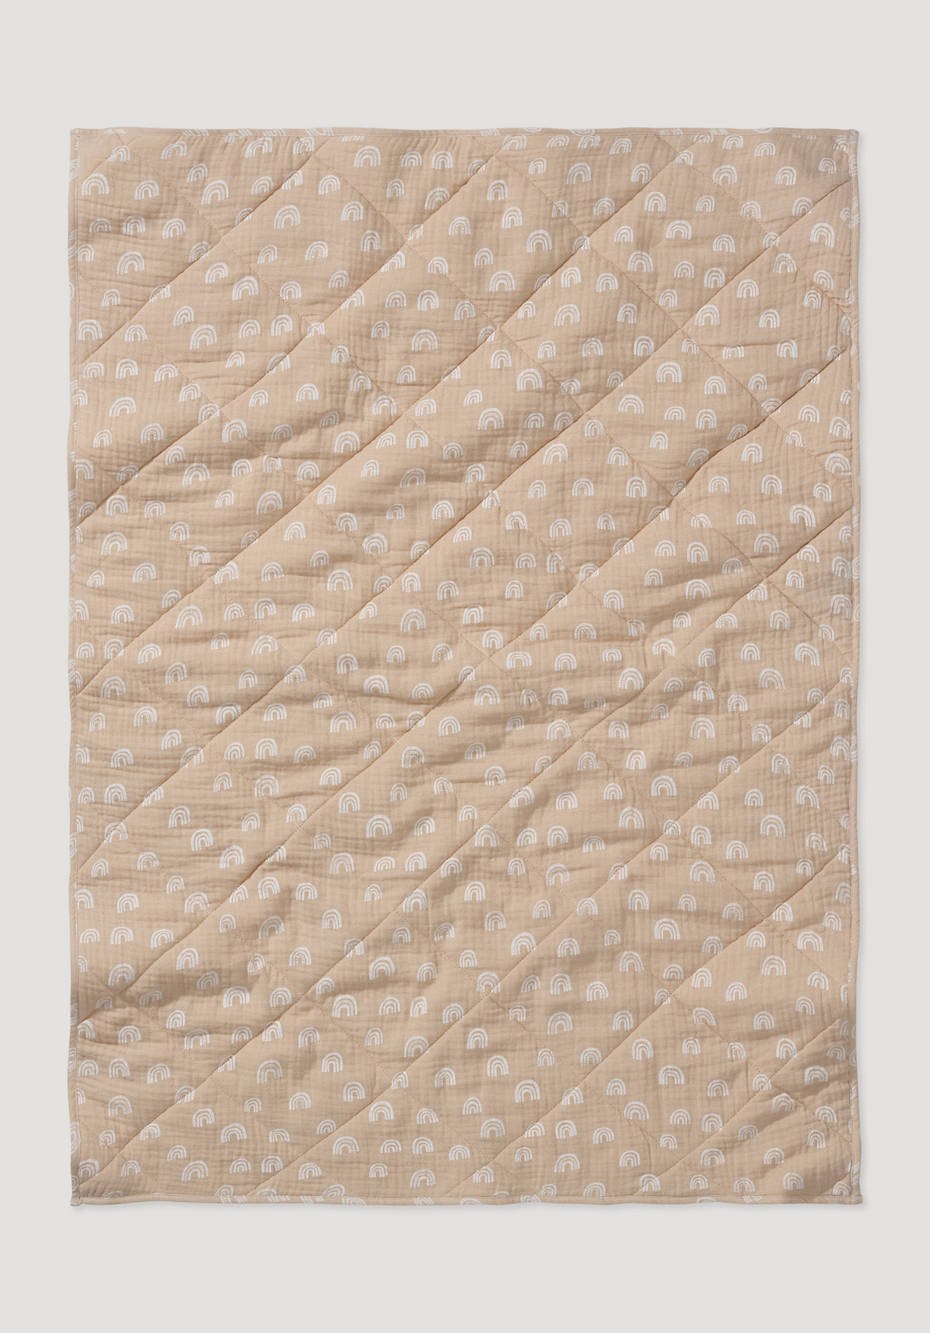 Muslin blanket made of organic cotton with wool filling